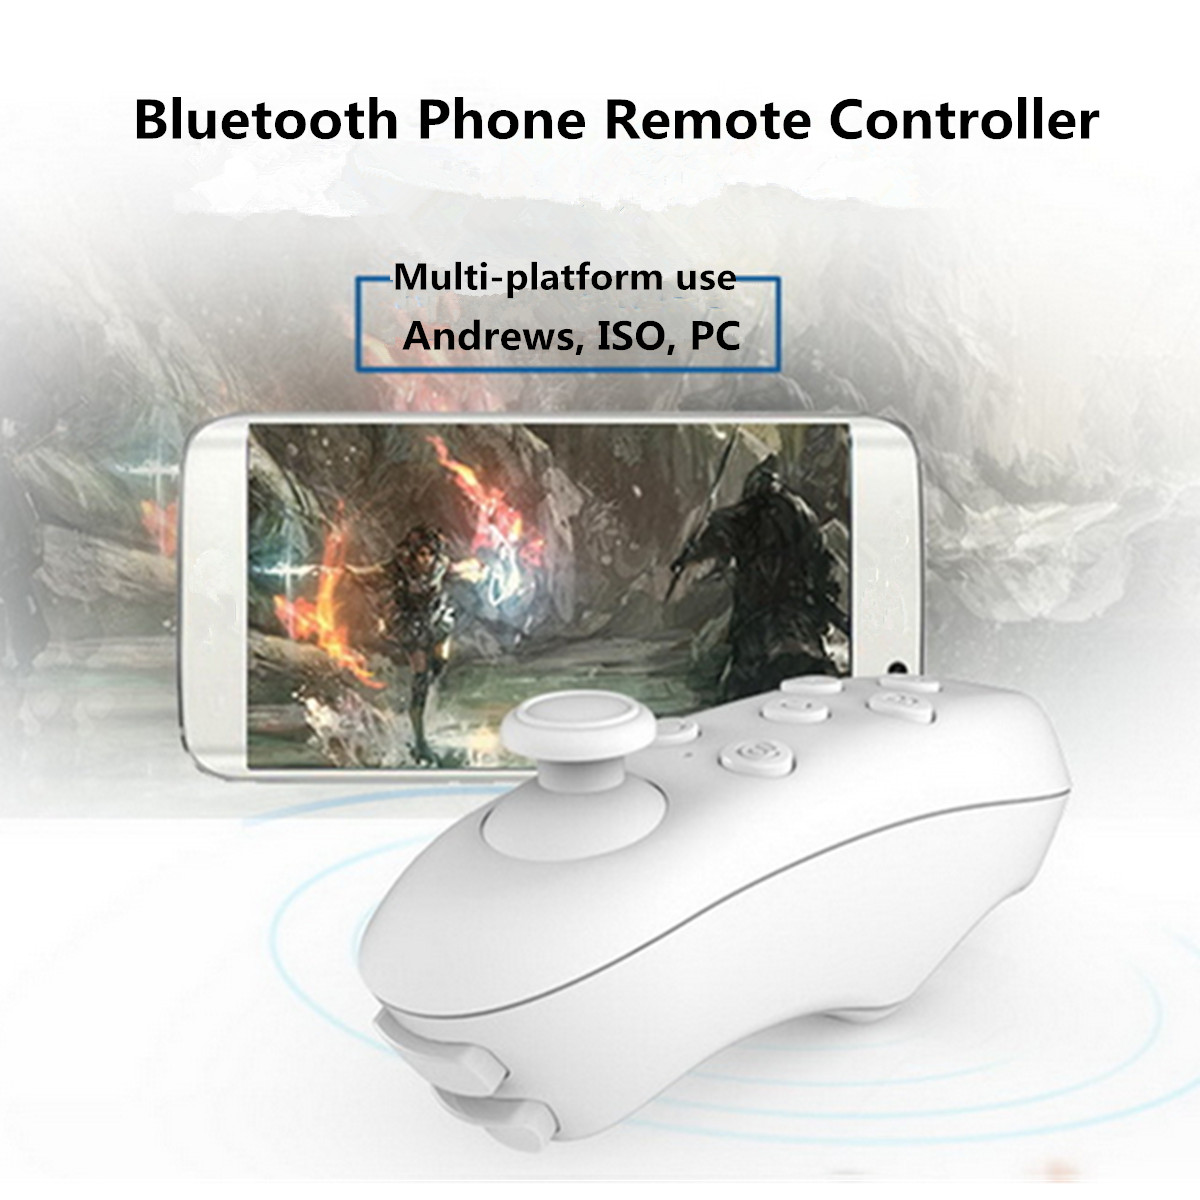 Wireless-Bluetooth-Virtual-Reality-BOX-Remote-Control-Joystick-Gamepad-Controller-for-iPhone-7-Andro-1129803